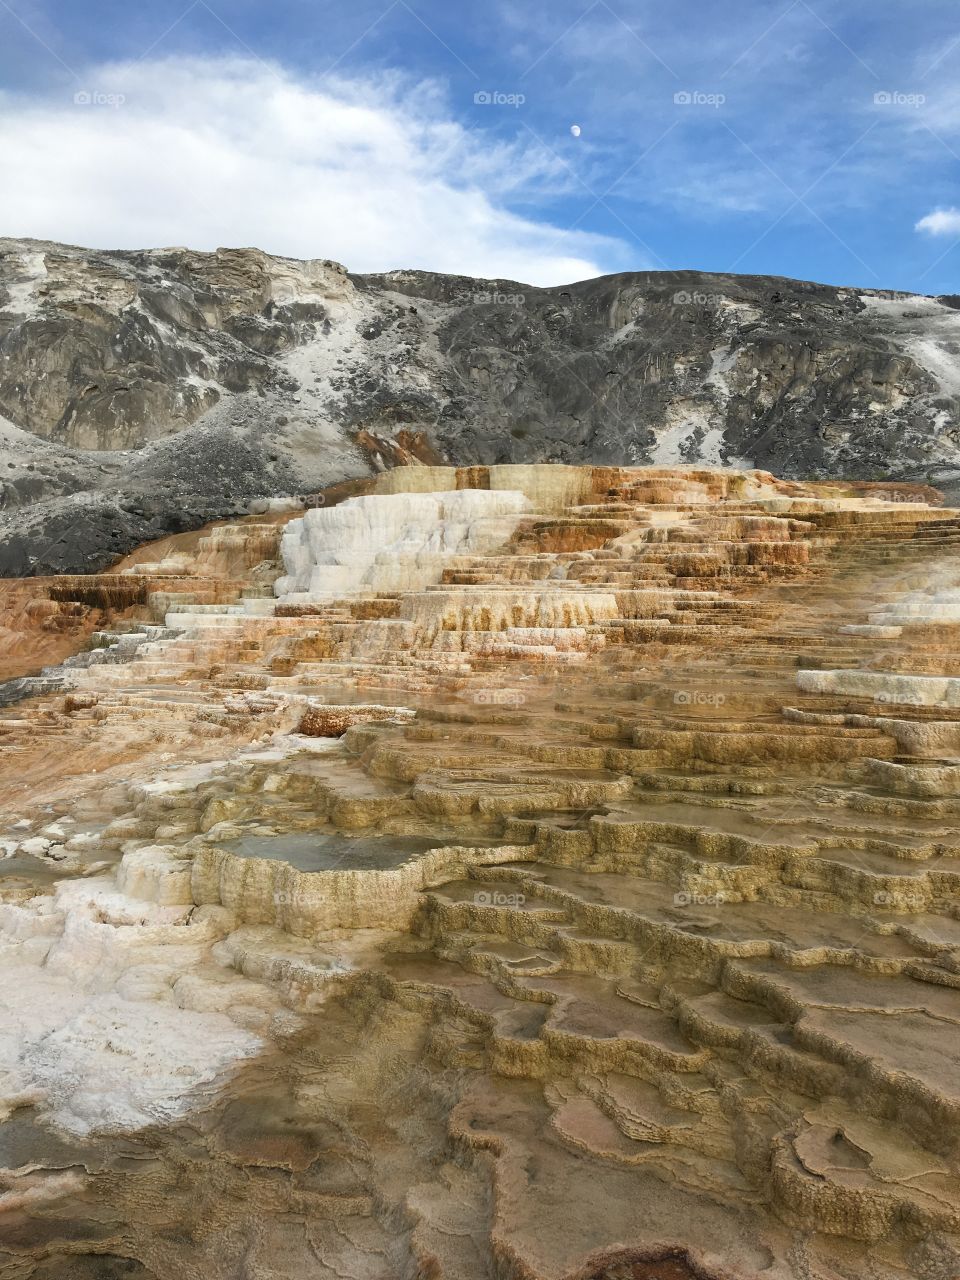 Travertine terraces of Mammoth hot springs, Yellowstone National Park, USA